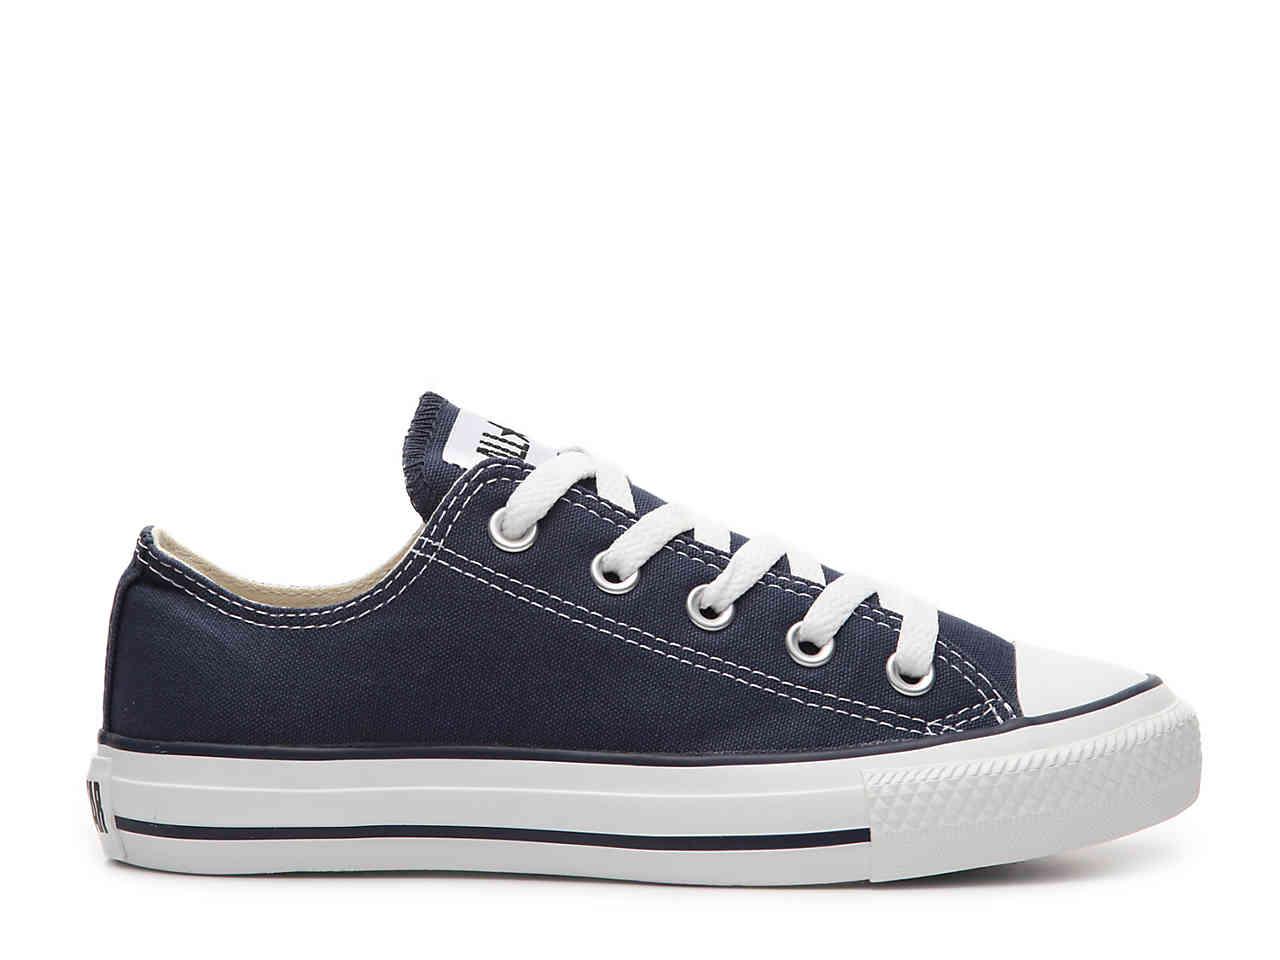 Converse Canvas Chuck Taylor All Star Sneaker in Navy (Blue) - Lyst